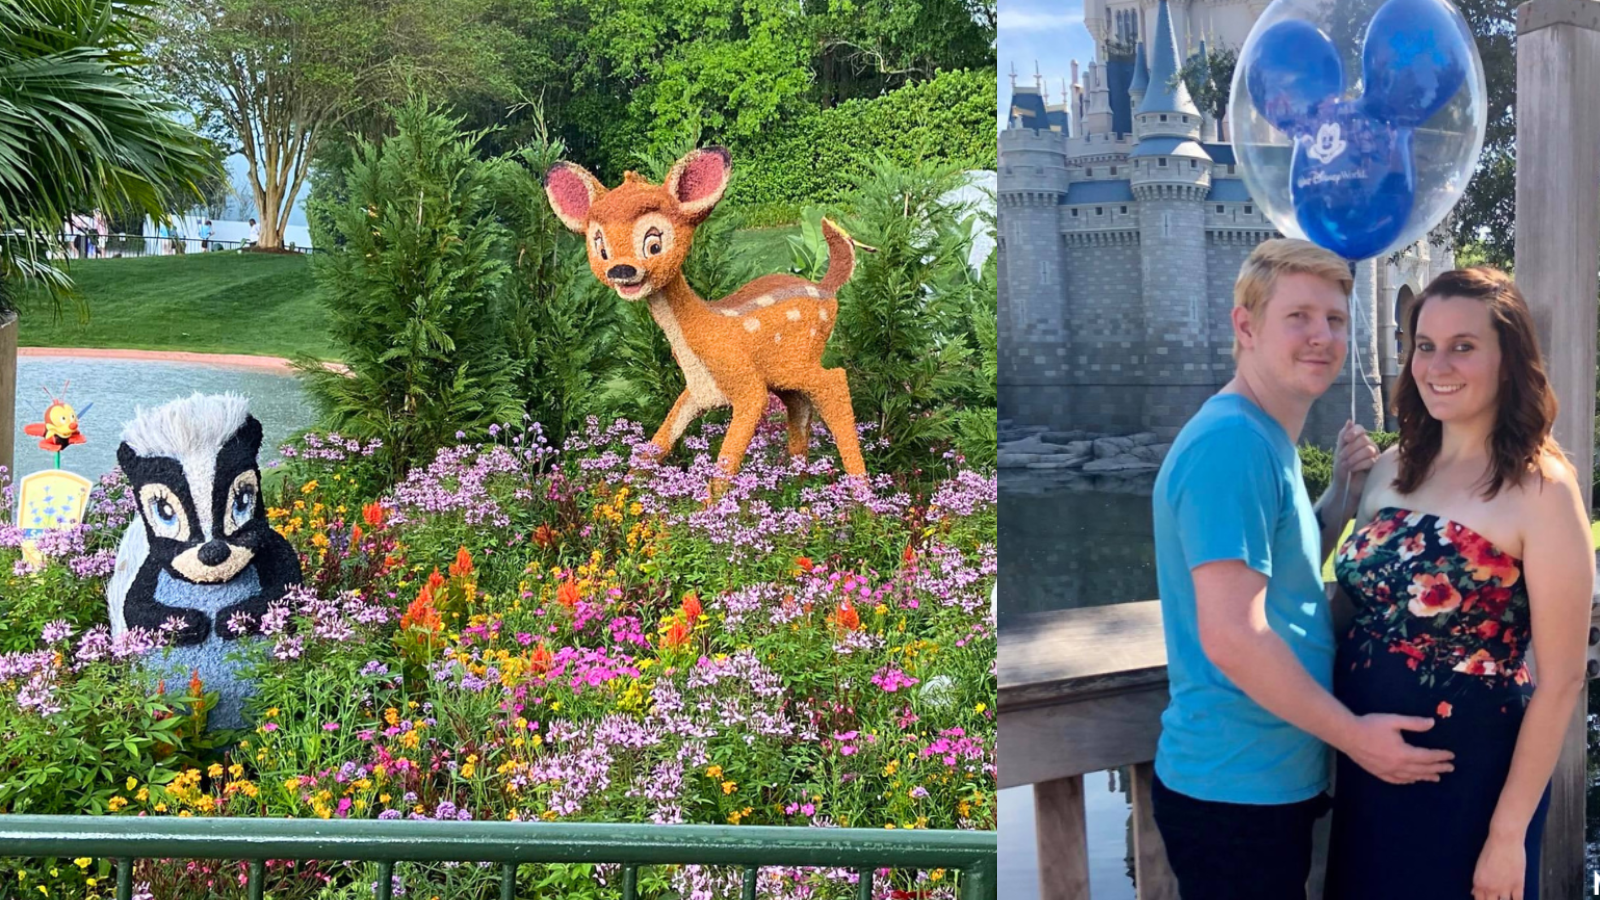 picture of me in front of castle at disney world while pregnant